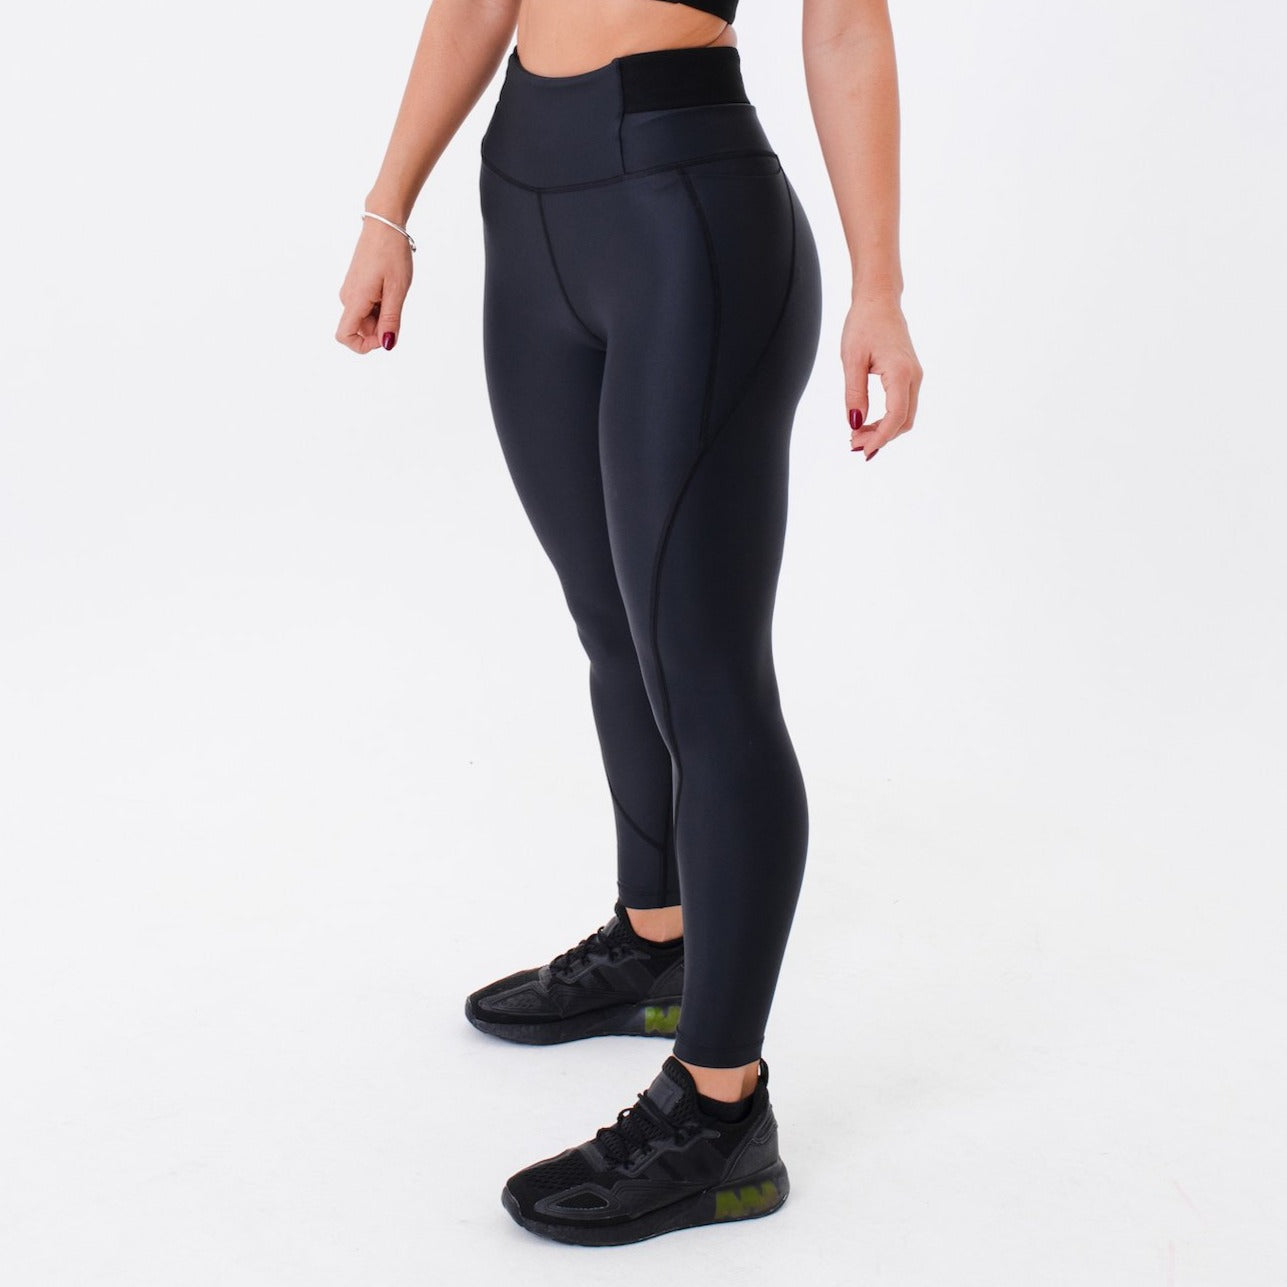 High Waist, Stretchy and Recovery Sports Leggings Anthracite